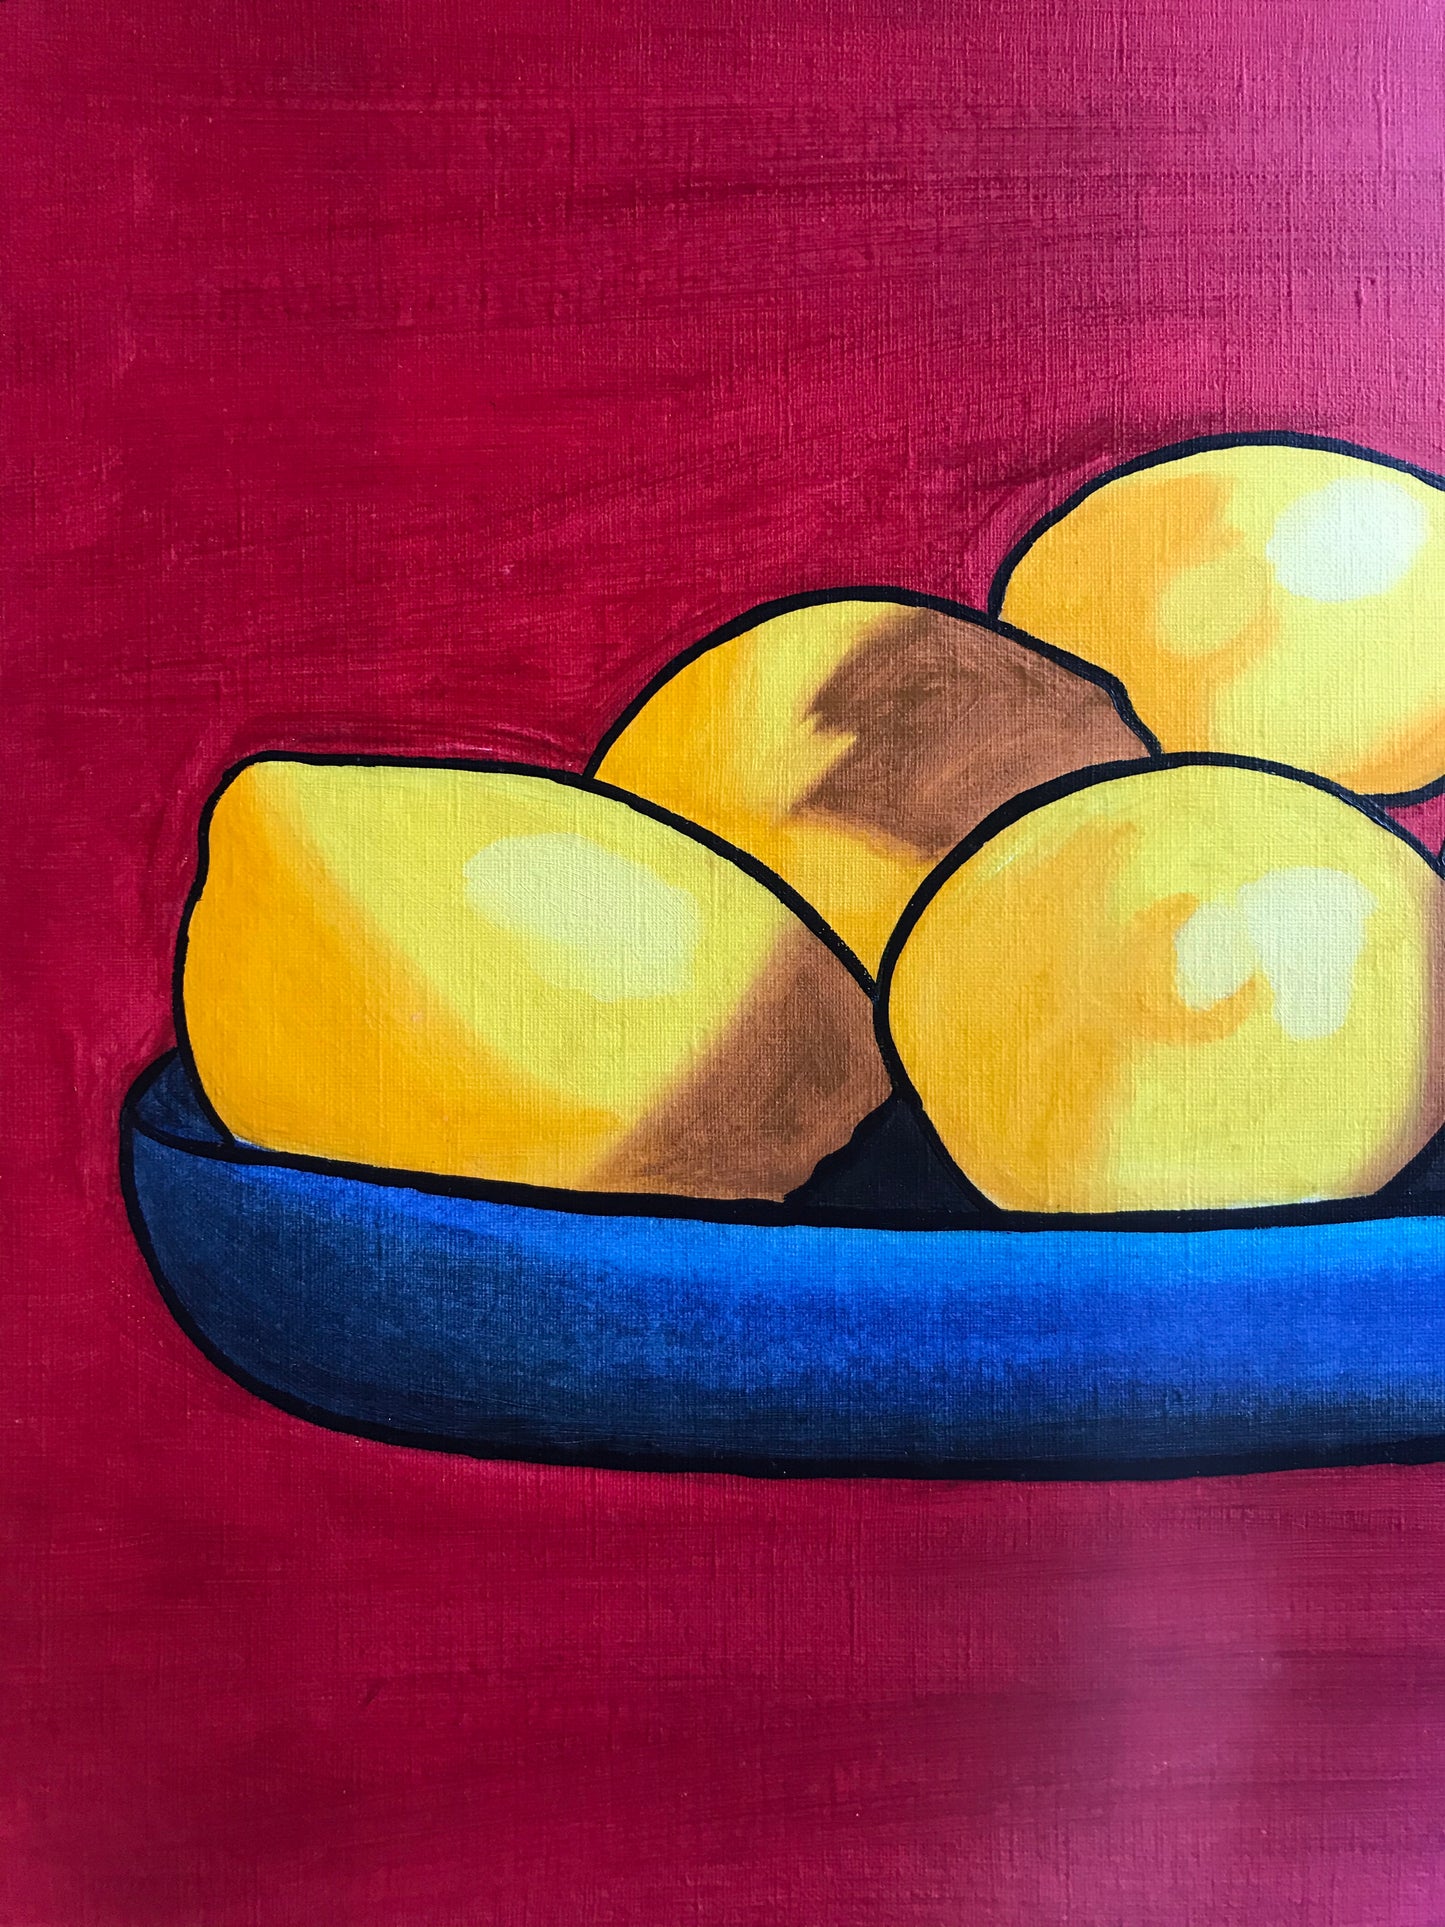 A print of an oil painting of yellow lemons on a blue plate against a red background